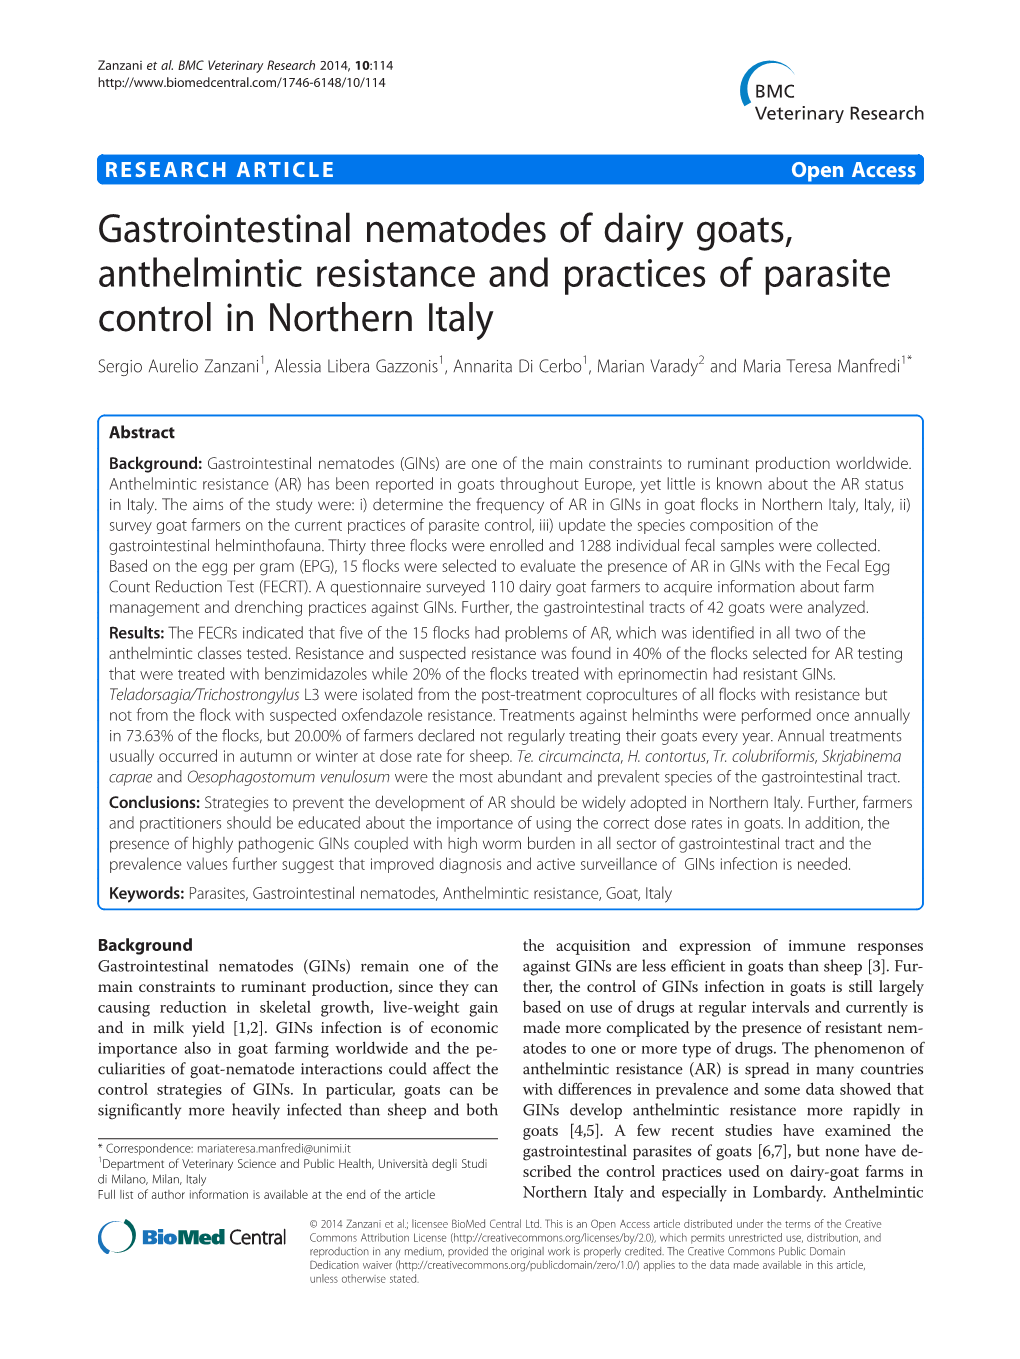 Gastrointestinal Nematodes of Dairy Goats, Anthelmintic Resistance And